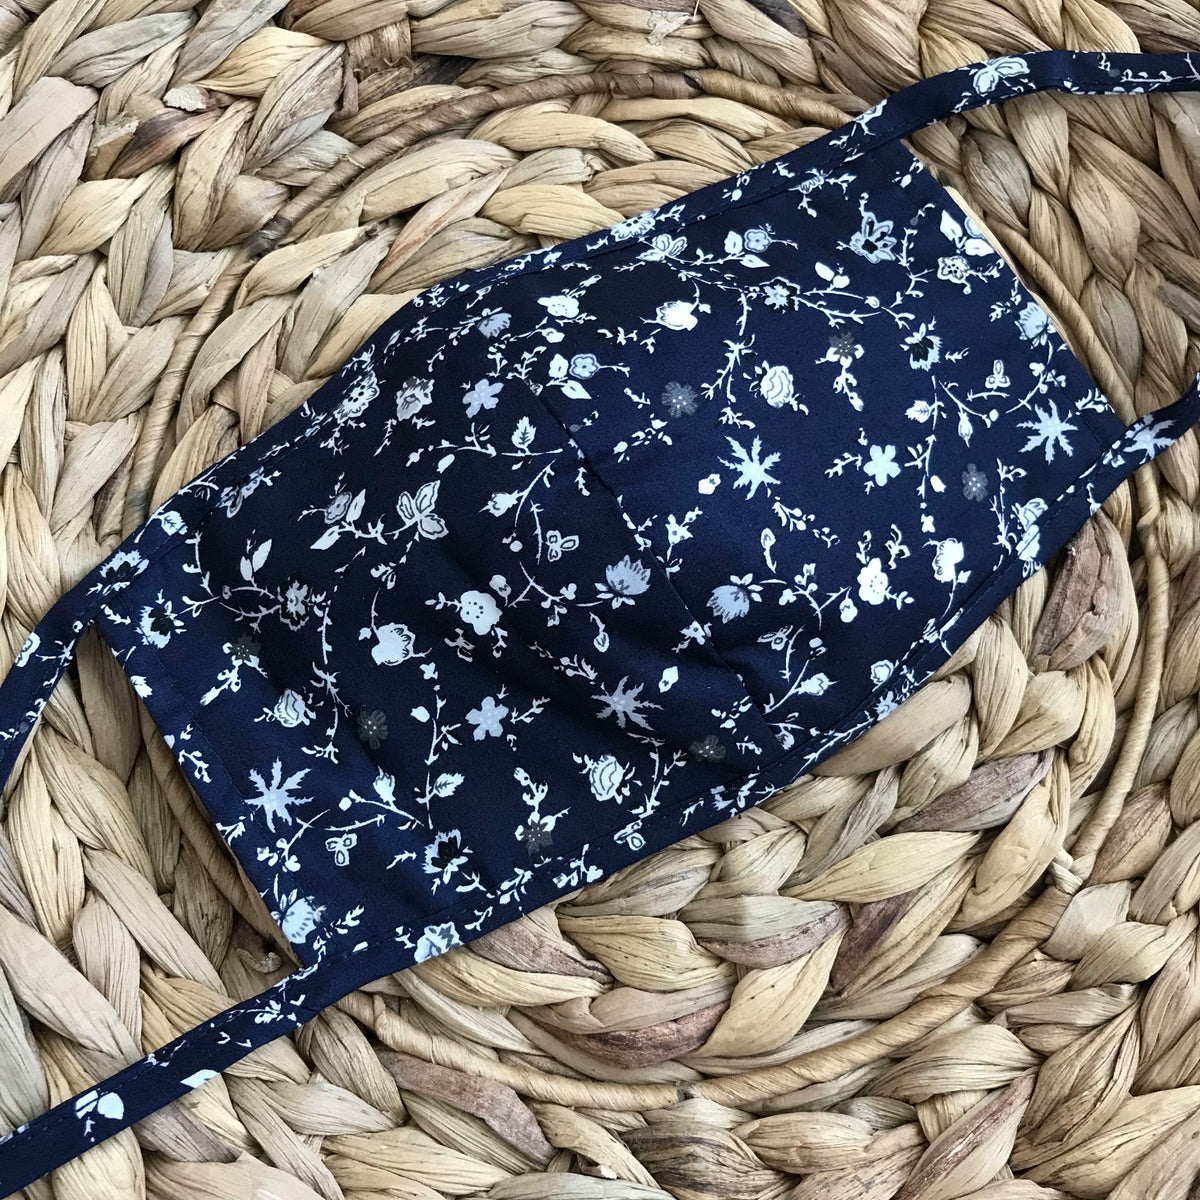 Navy blue face mask with a gray and white floral print. Mask has long ties to tie in the back of the head.